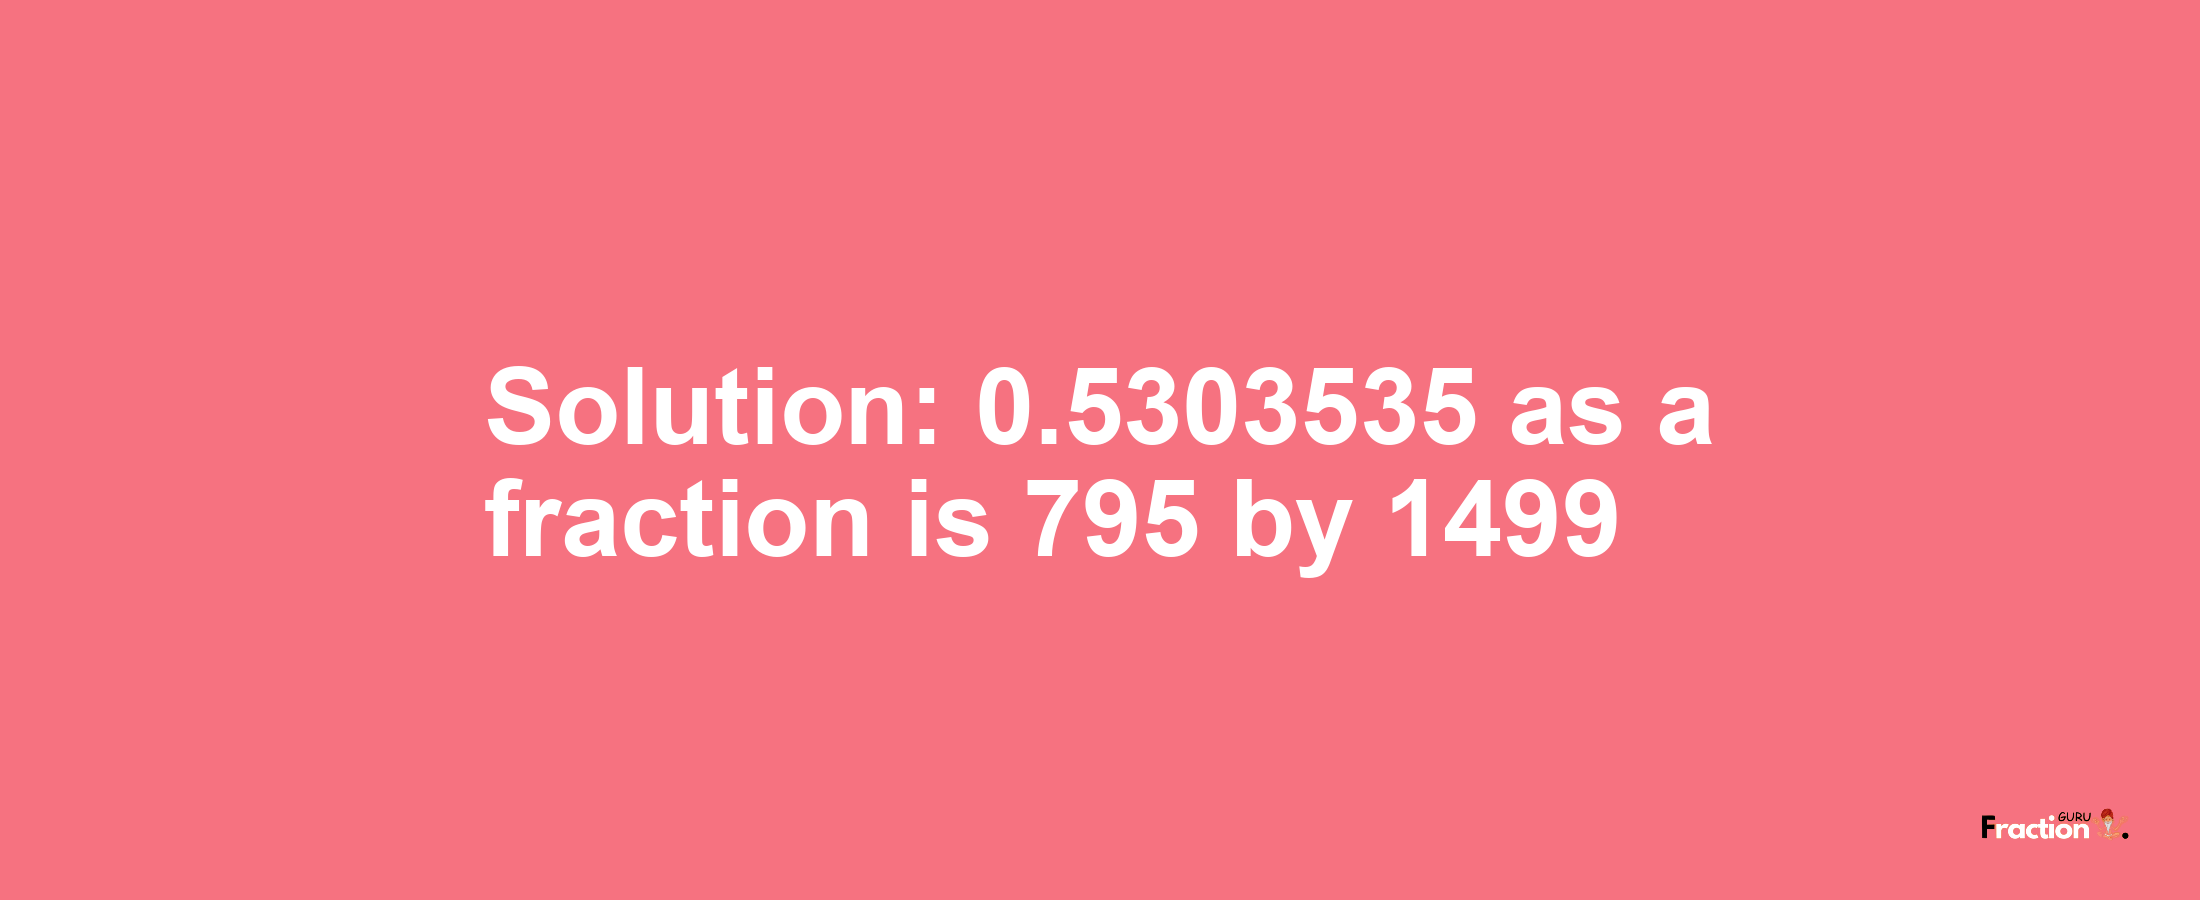 Solution:0.5303535 as a fraction is 795/1499